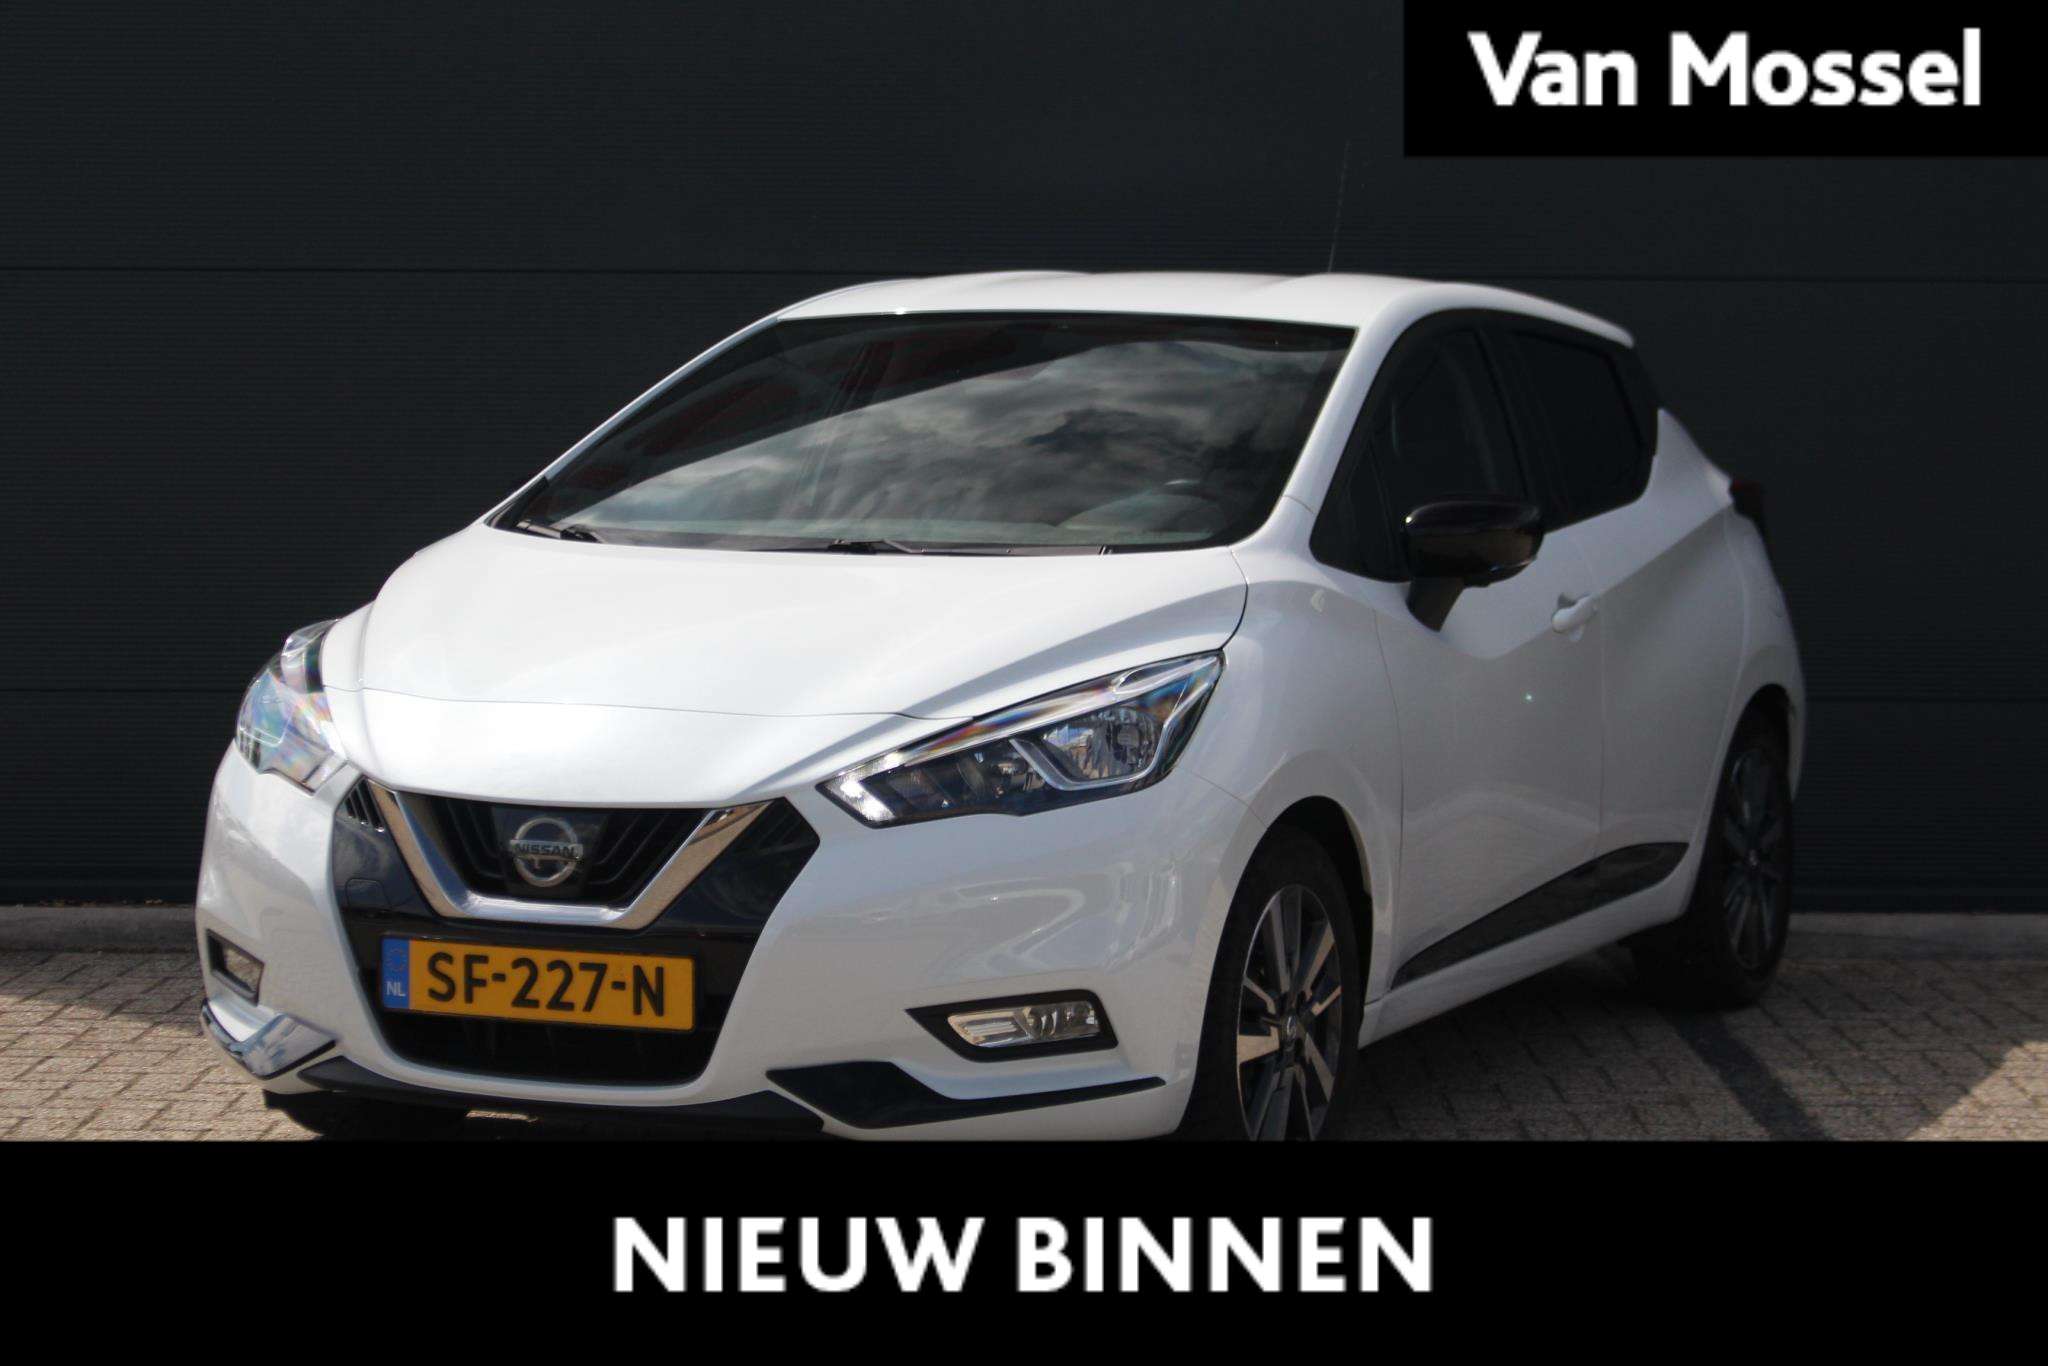 Nissan Micra Compact in White used in TIEL for € 12,840.-